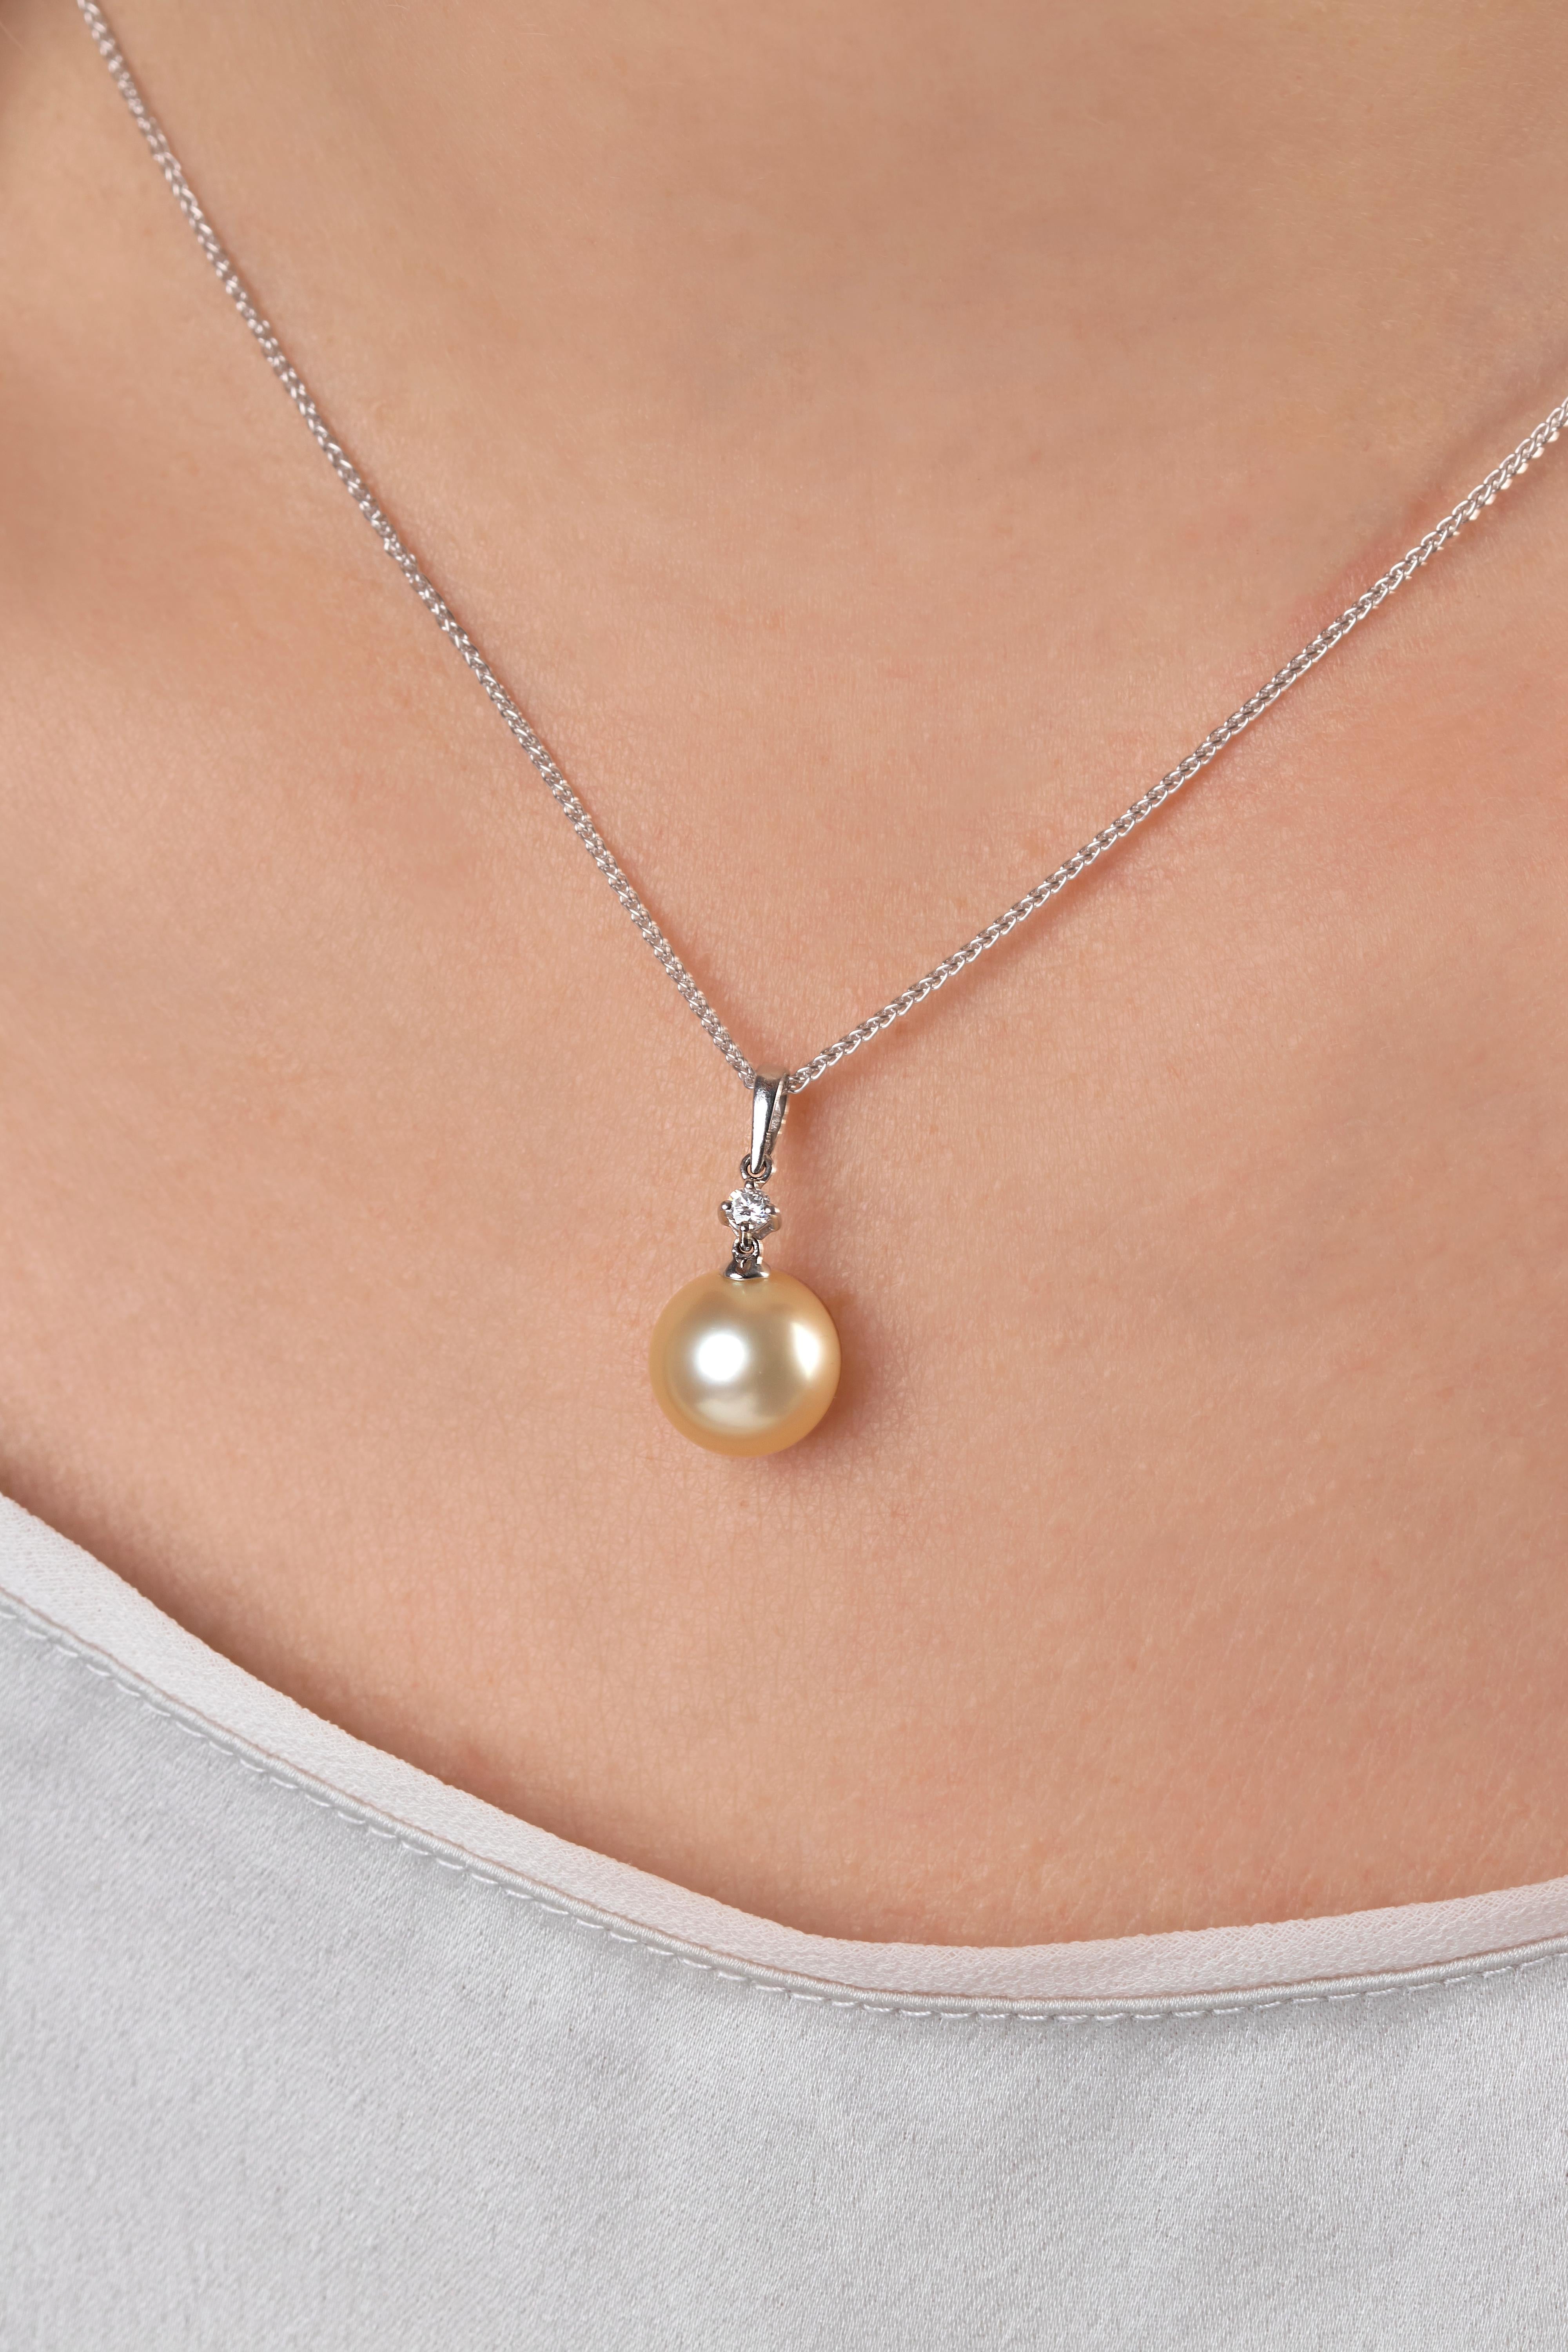 This elegant pendant by Yoko London is simple yet effective, featuring a lustrous Golden South Sea pearl suspended beneath a solitaire diamond. To be worn in both casual and formal contexts, this pendant is easily styled with other Golden South Sea